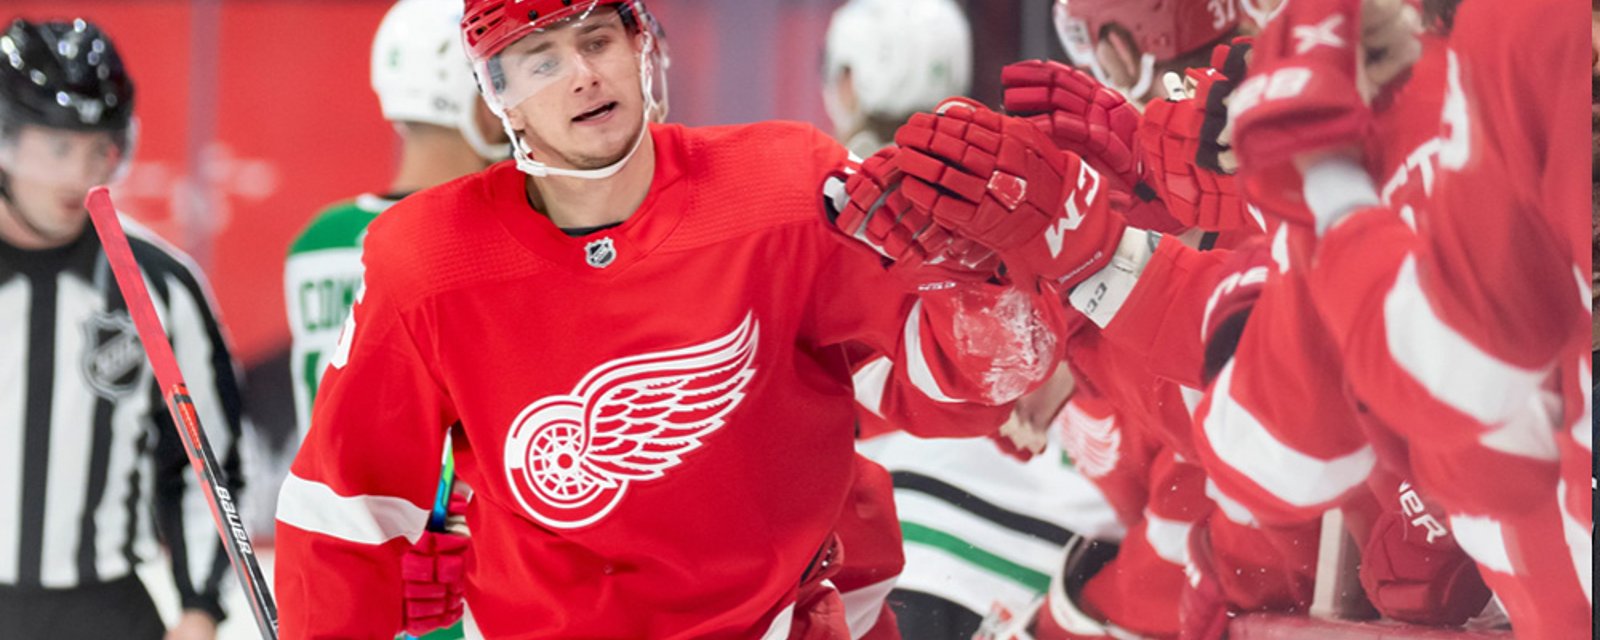 Newly re-signed Jakub Vrana predicted to have a big season for Red Wings 